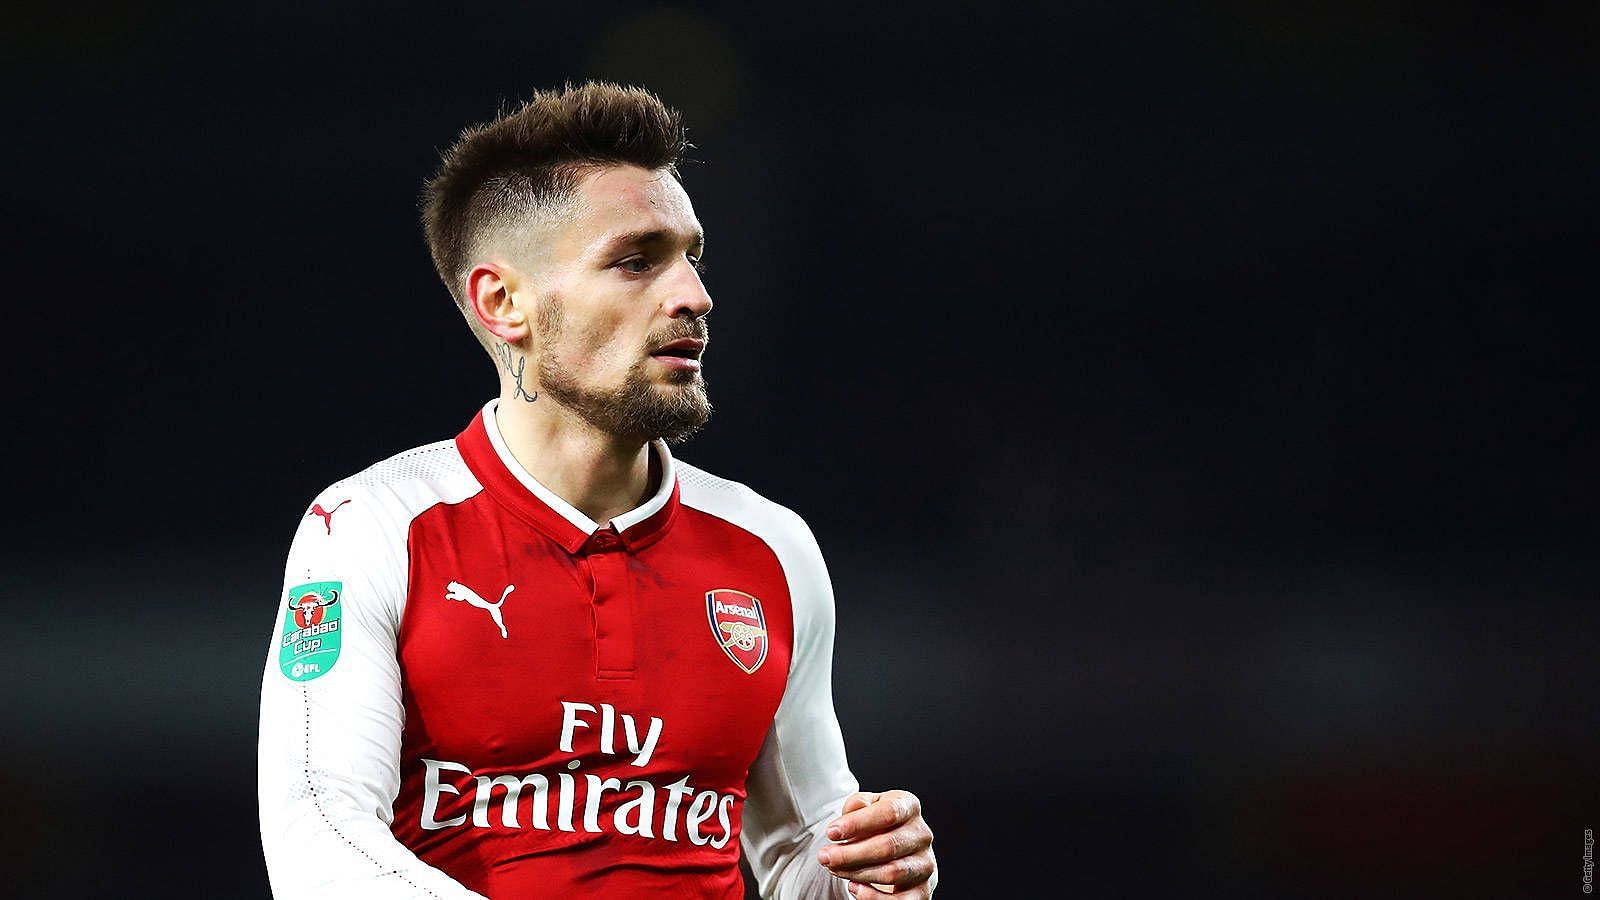 Despite being a tried and tested right-back, Debcuhy failed at Arsenal